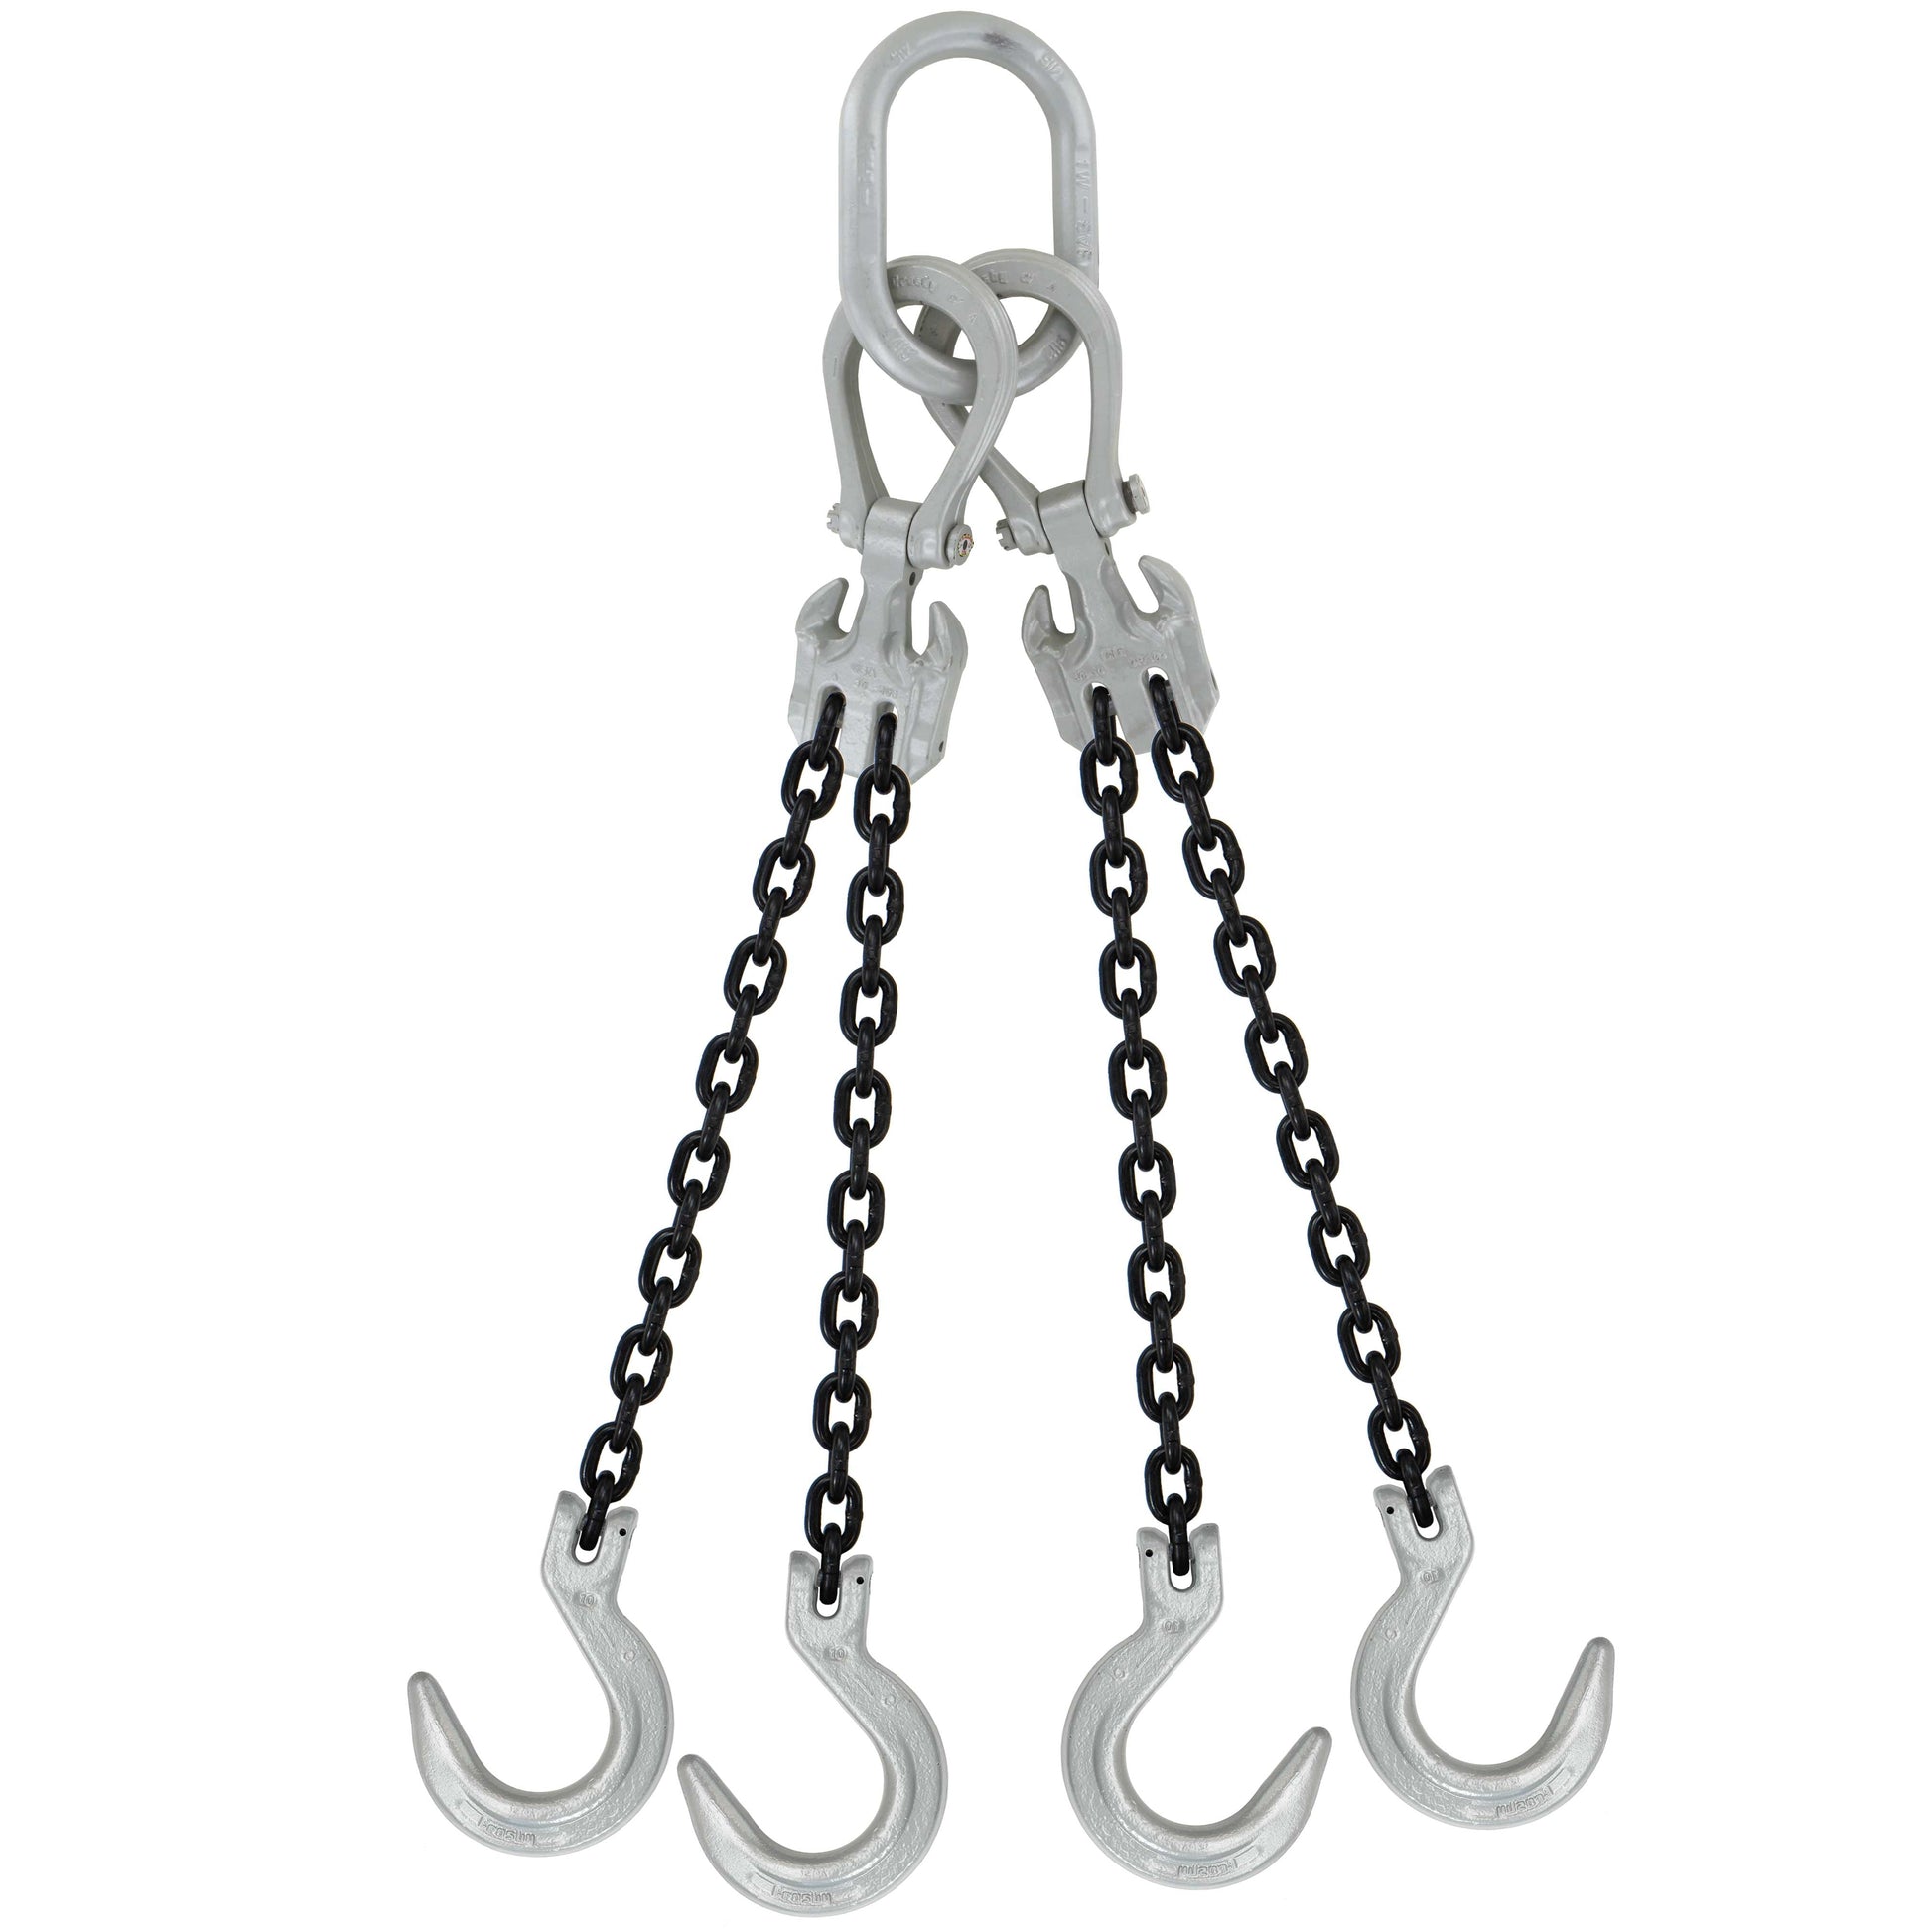 38 inch x 15 foot Domestic Adjustable 4 Leg Chain Sling w Crosby Foundry Hooks Grade 100 image 1 of 2